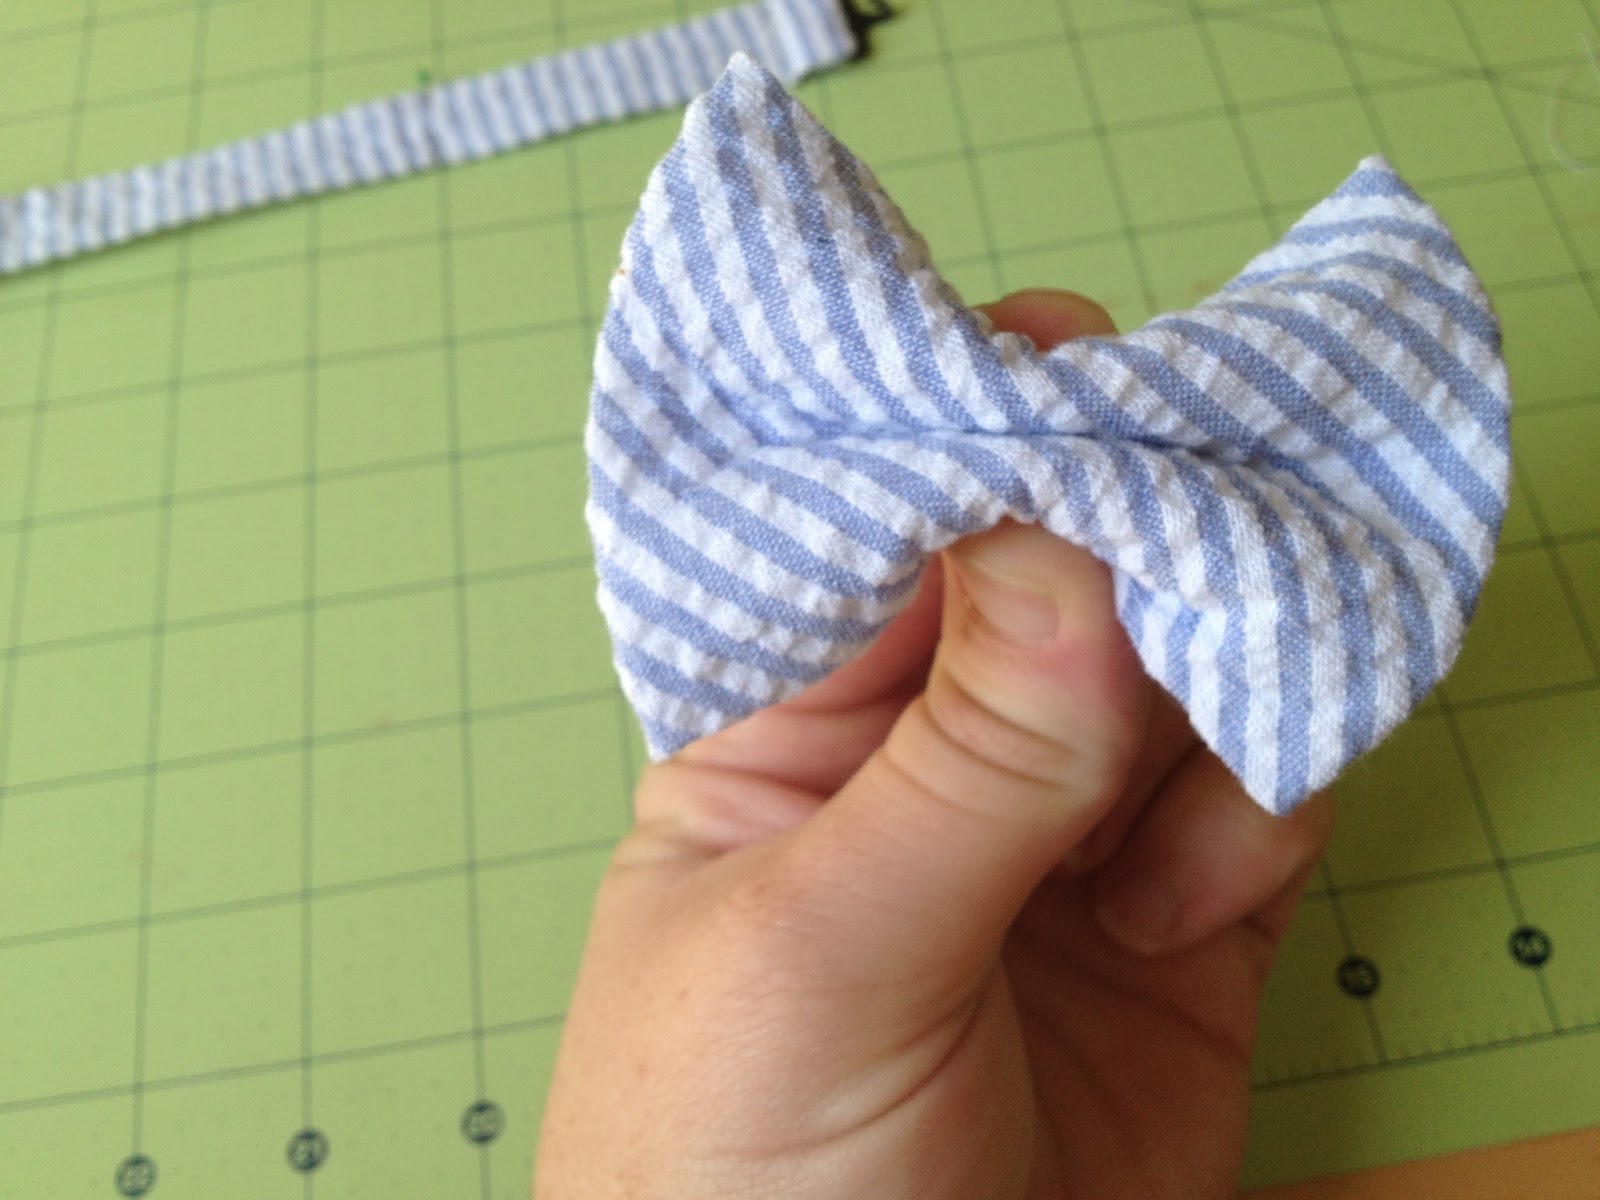 Coconut Love: How To Make A Pre-Tied Bow Tie For Babies and Kids